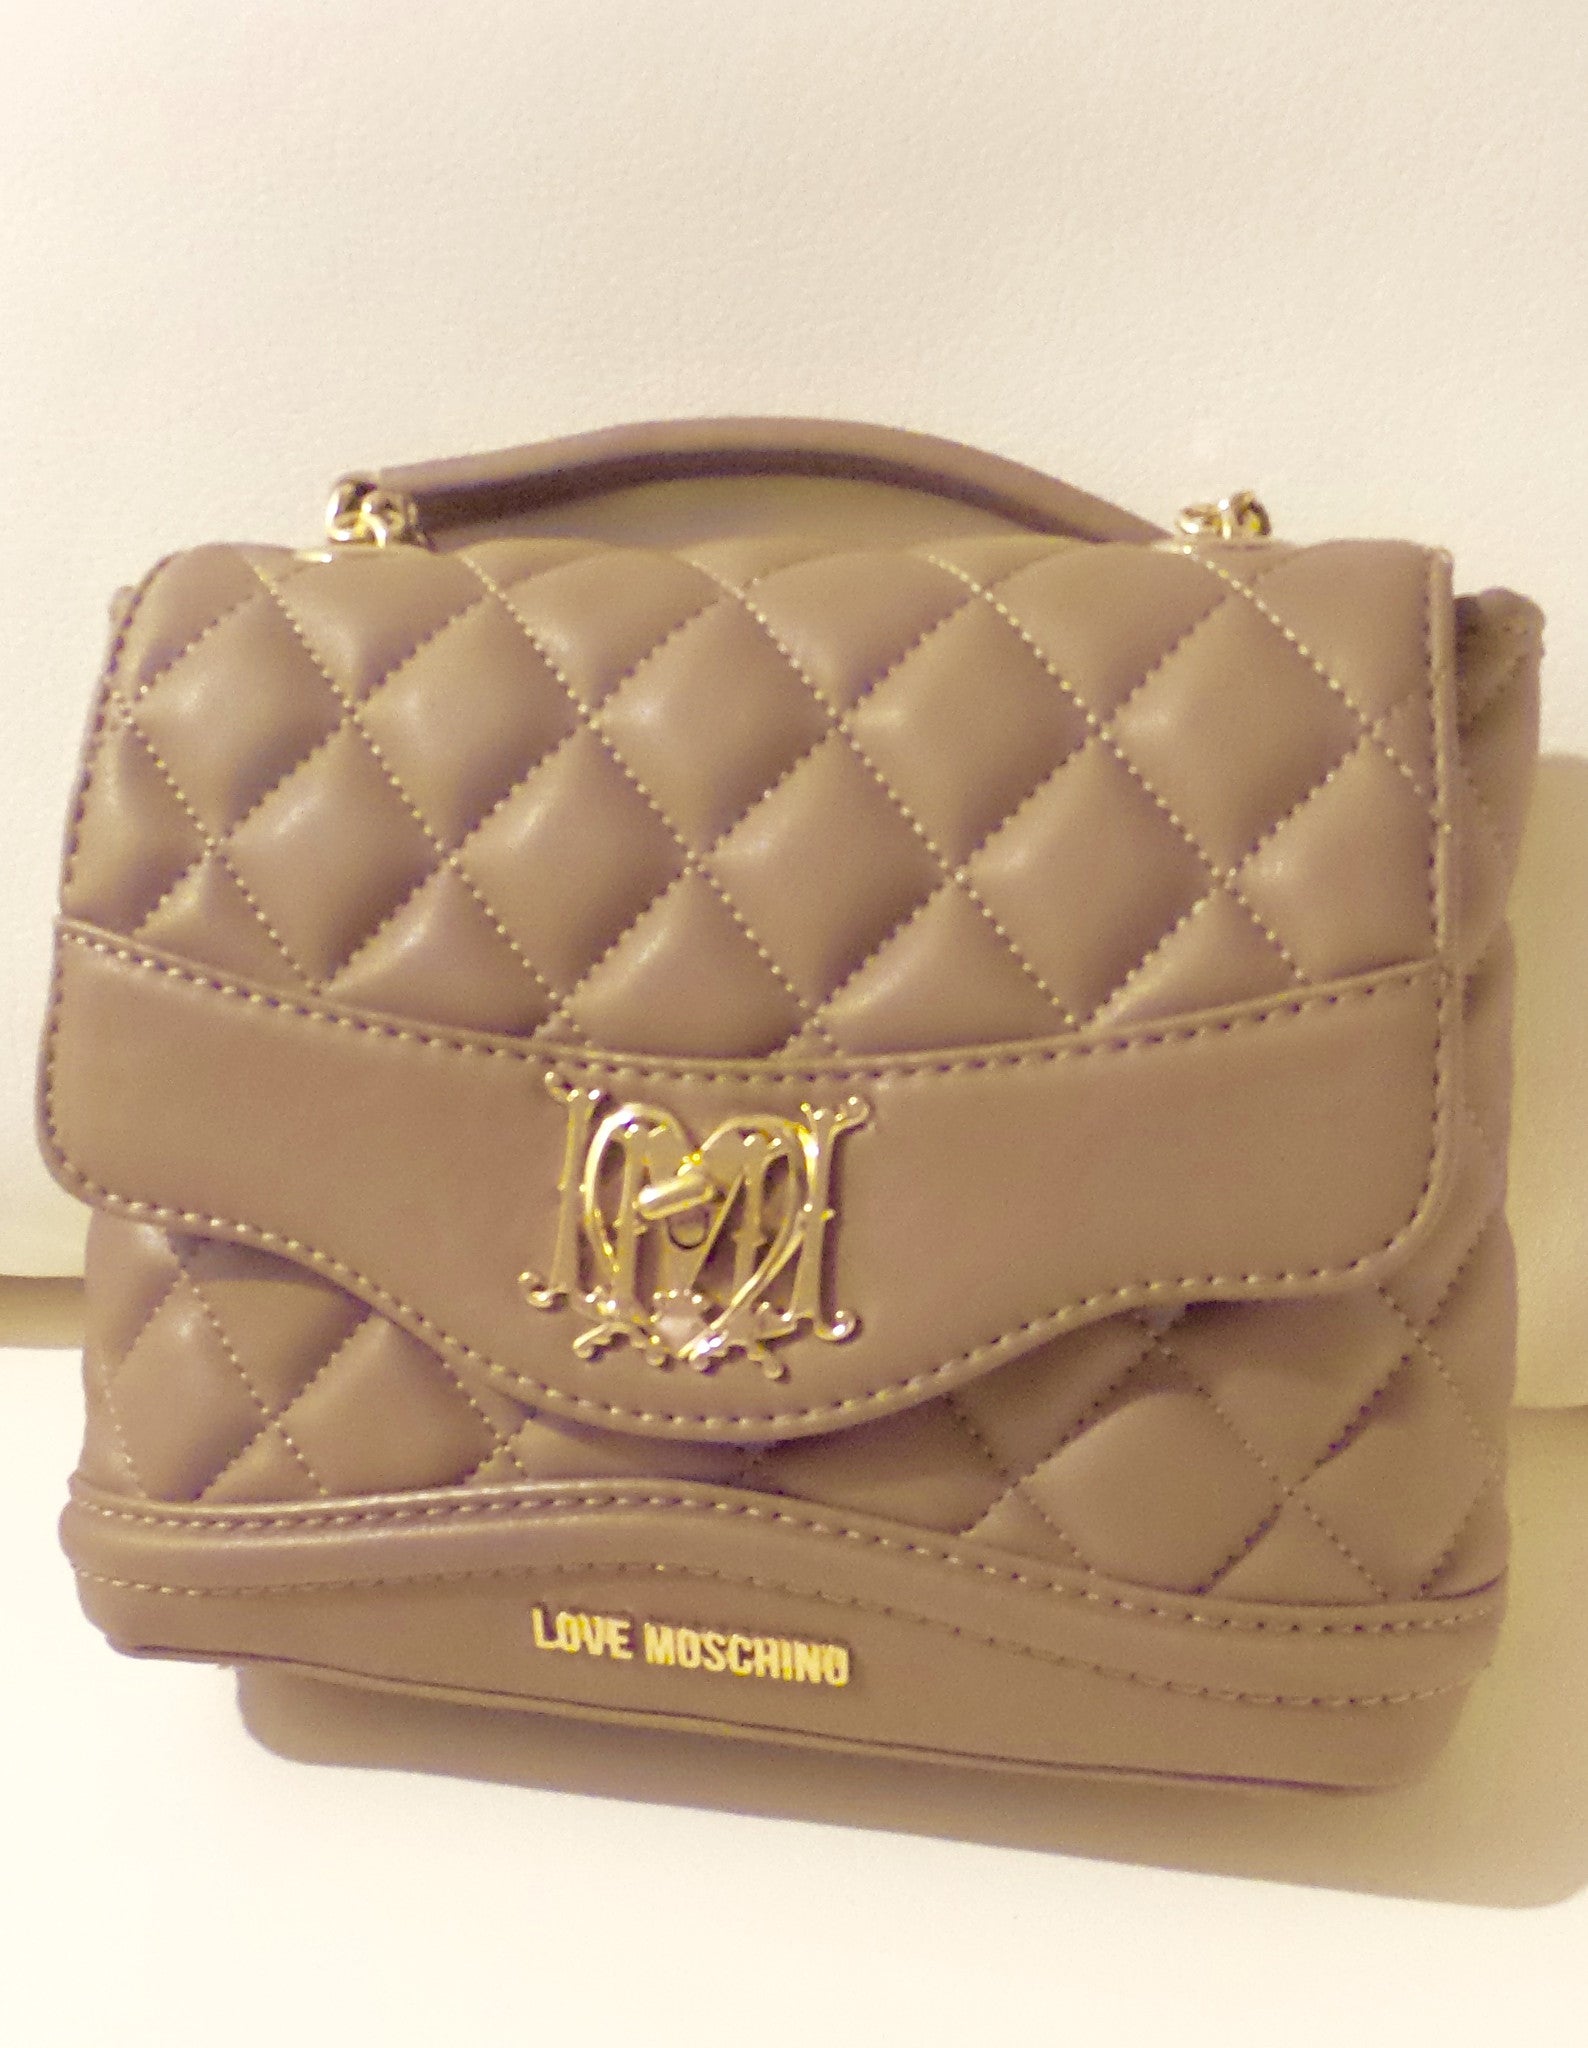 Love Moschino Quilted Mini leather Shoulder Handbag/Accessories